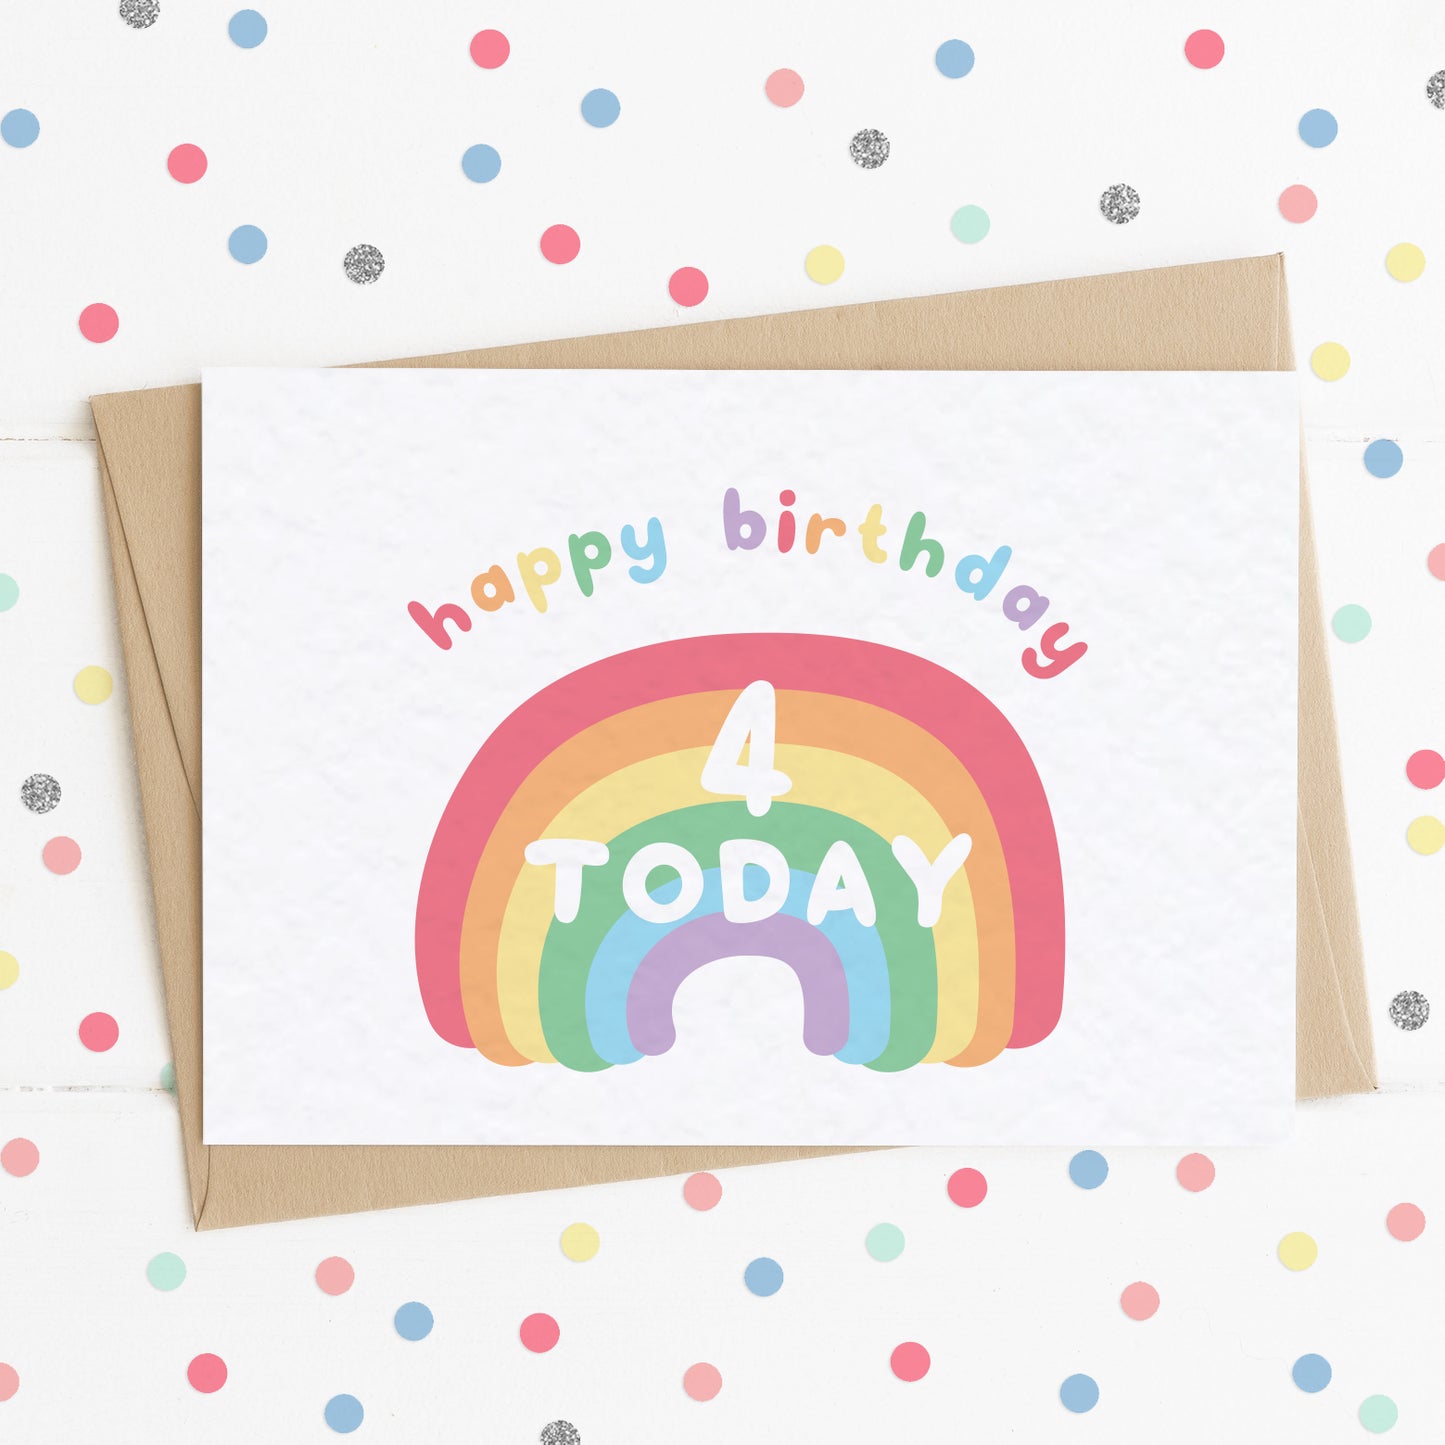 A cute milestone age birthday card with a smiling happy rainbow on it and the message "HAPPY BIRTHDAY - 4 TODAY".